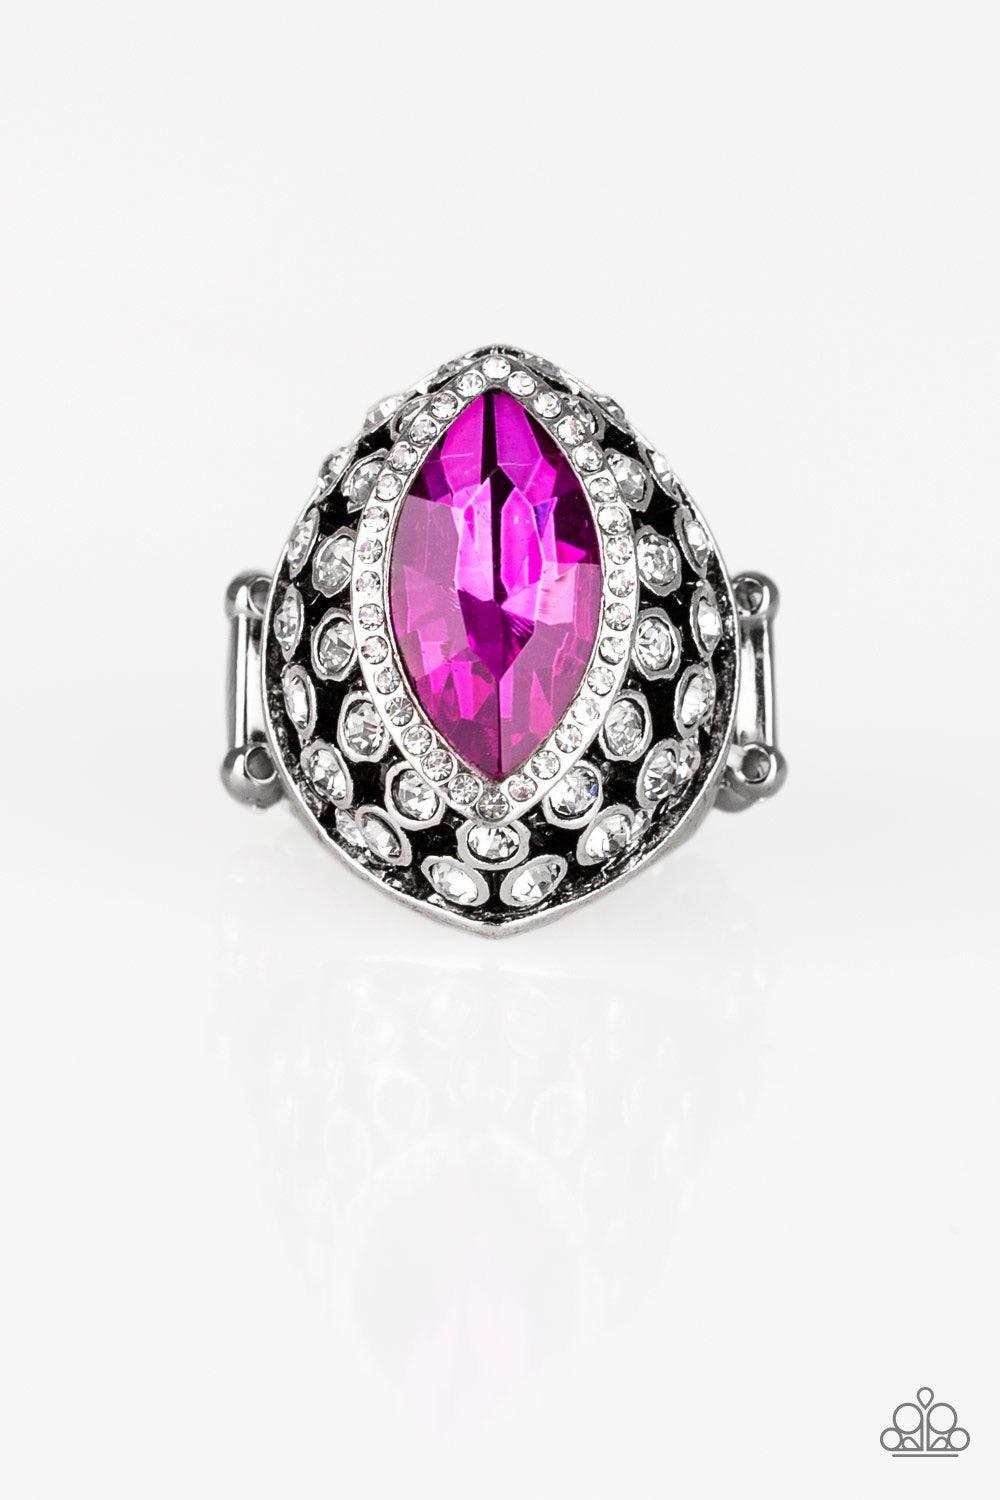 Paparazzi Accessories Royal Radiance - Pink Featuring a regal marquise style cut, a pink rhinestone is pressed into the center of a silver frame radiating with glittery white rhinestones for a blinding finish. Features a stretchy band for a flexible fit.